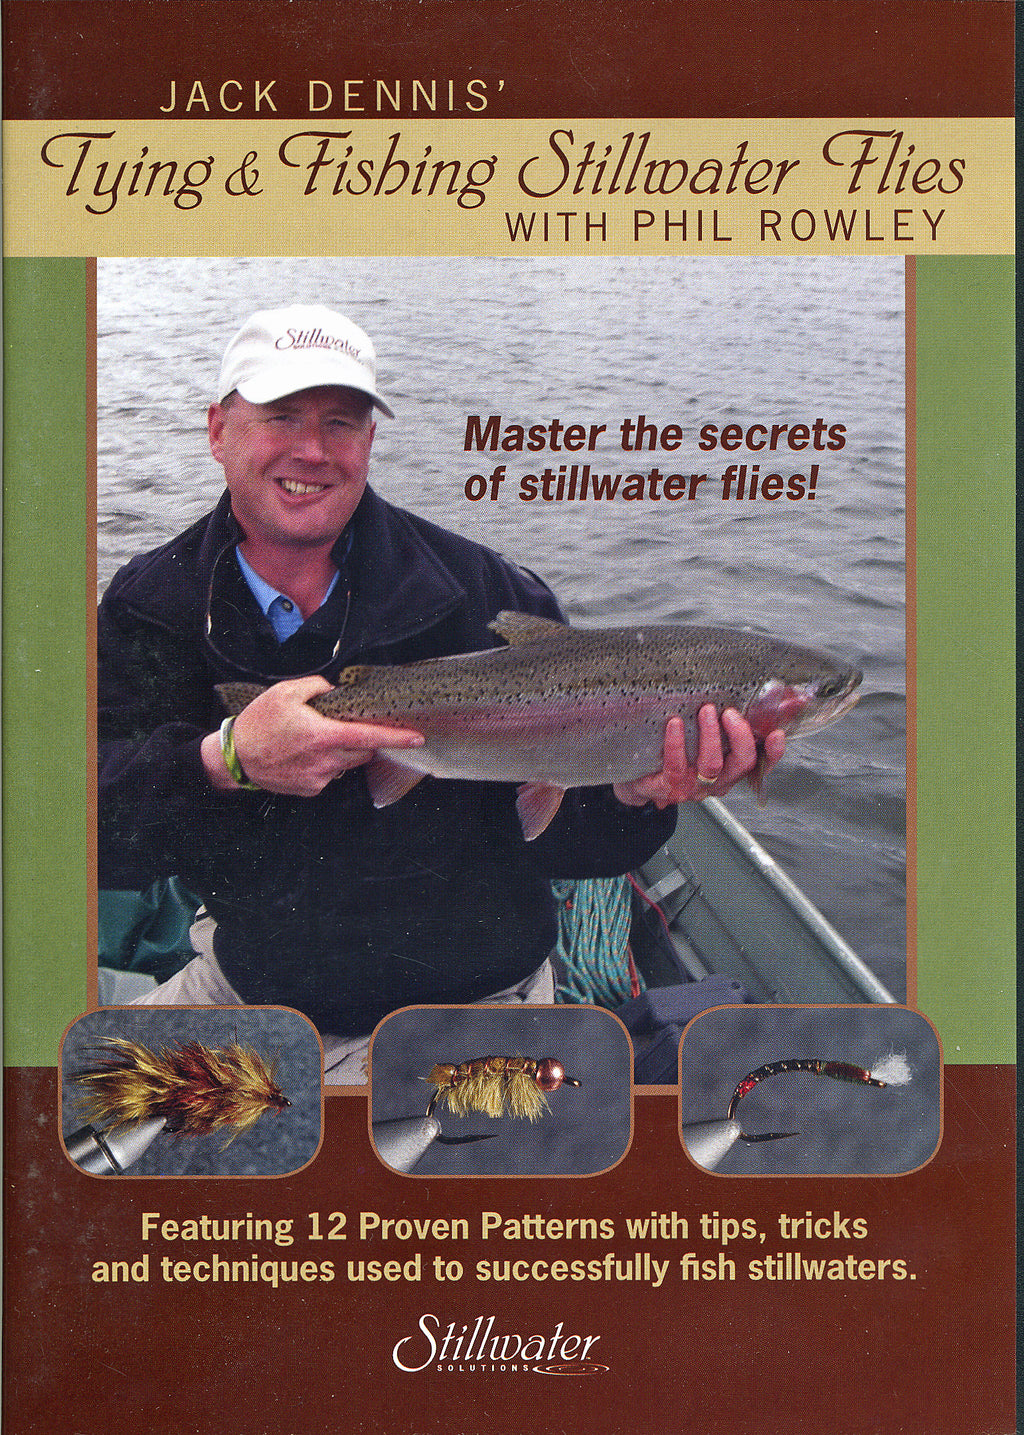 THE ORVIS GUIDE TO STILLWATER TROUT FISHING – Phil Rowley & Brian Chan's Stillwater  Fly Fishing Store